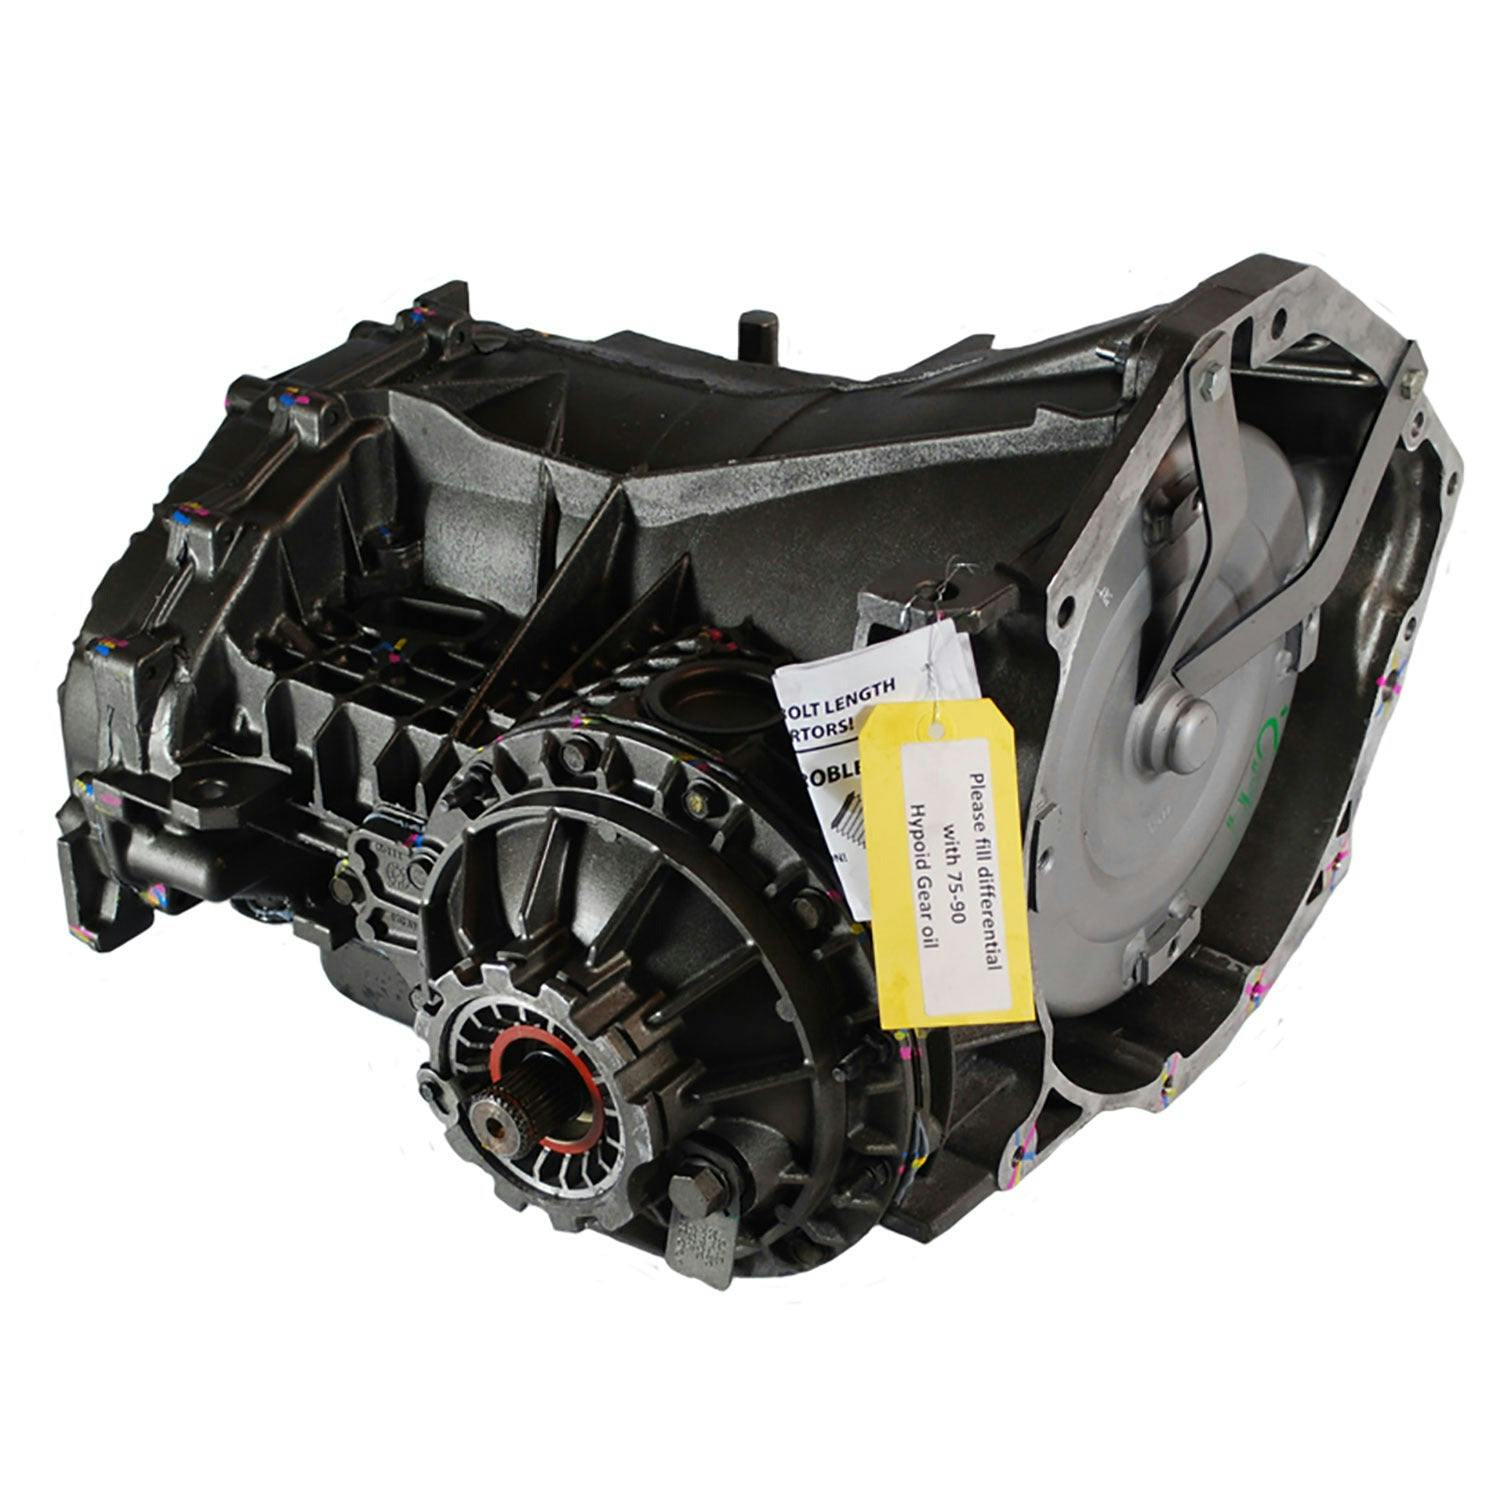 Automatic Transmission for 1998-2004 Chrysler Concorde/300M and Dodge Intrepid FWD with 2.7L V6 Engine